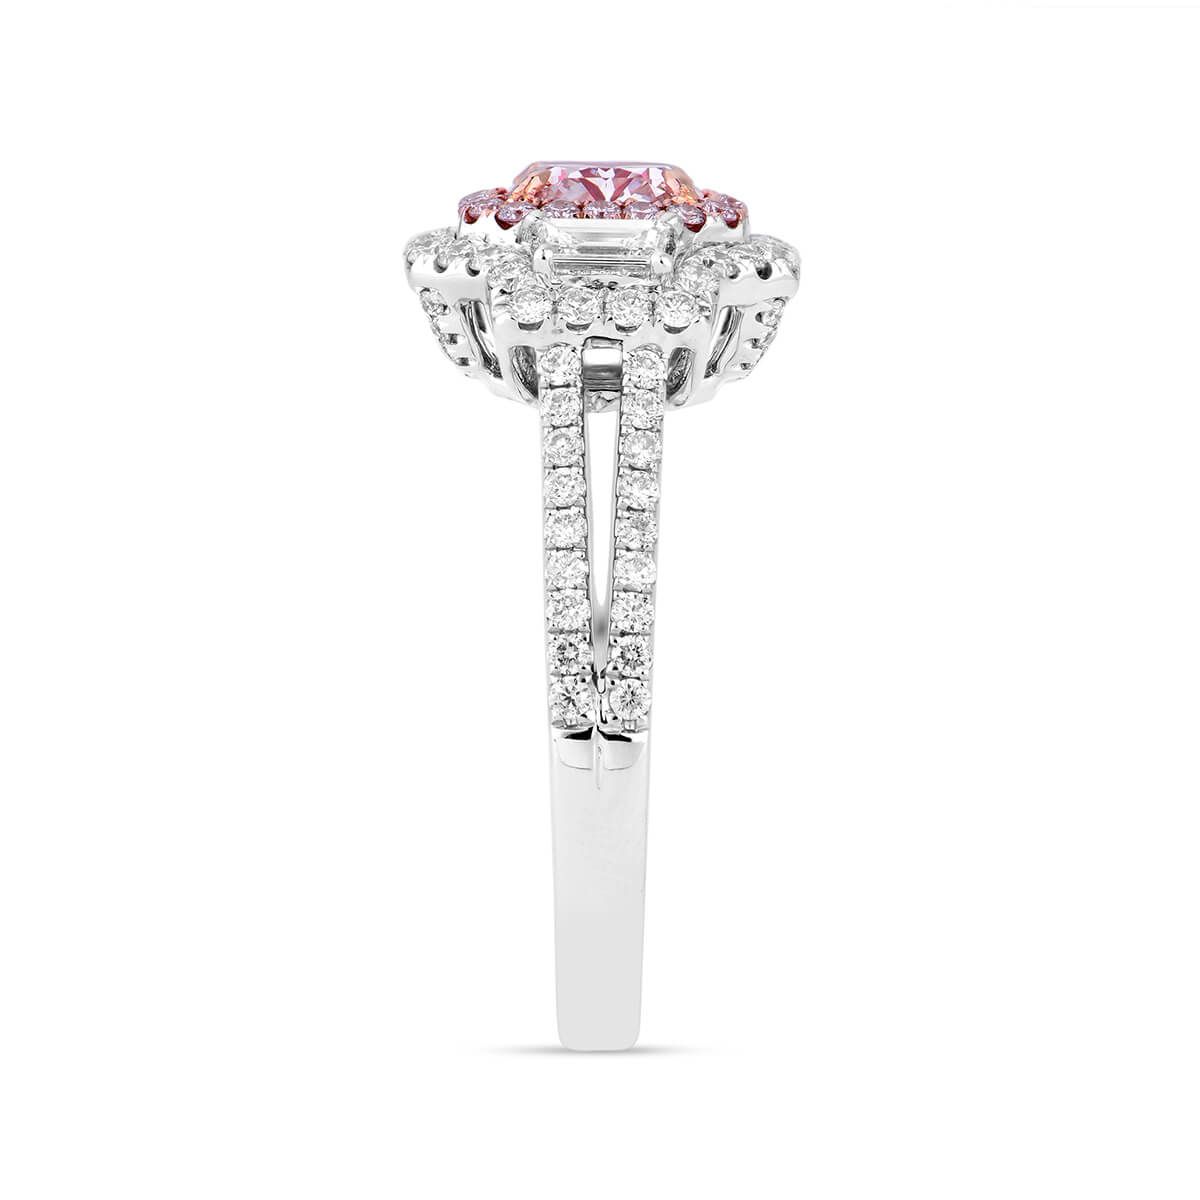 Very Light Pink Diamond Ring, 0.87 Ct. (1.59 Ct. TW), Radiant shape, GIA Certified, 2234660534